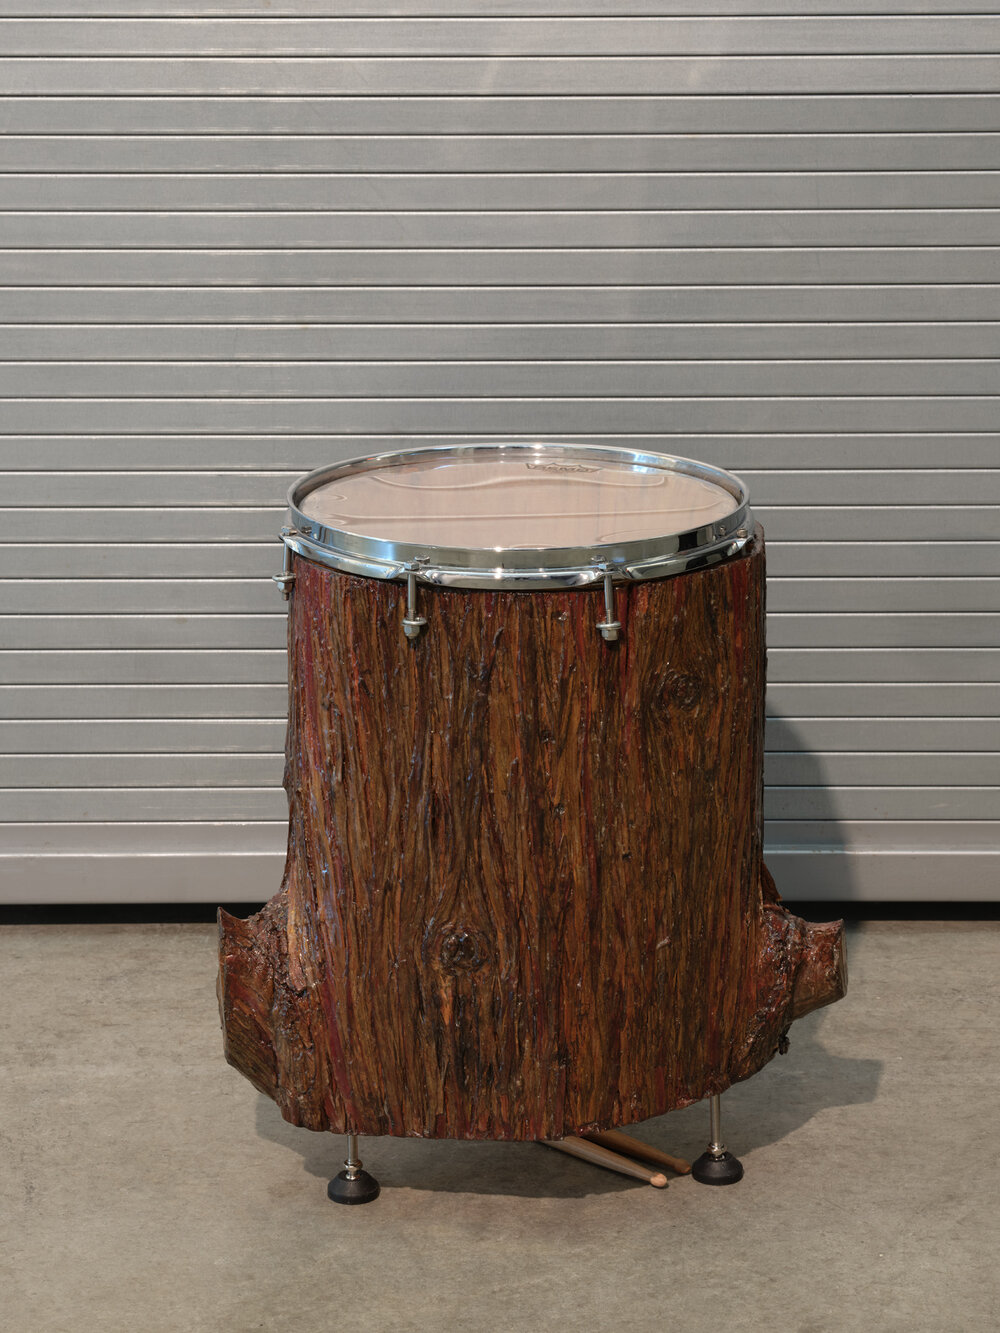  Germaine Koh,  Crowd Shyness: the sound of its making , 2020, Hollowed cedar stump, drum head, hardware, resin, weather report. Collection of the artist. Installed at the Morris and Helen Belkin Art Gallery, University of British Columbia. Photo: Ra